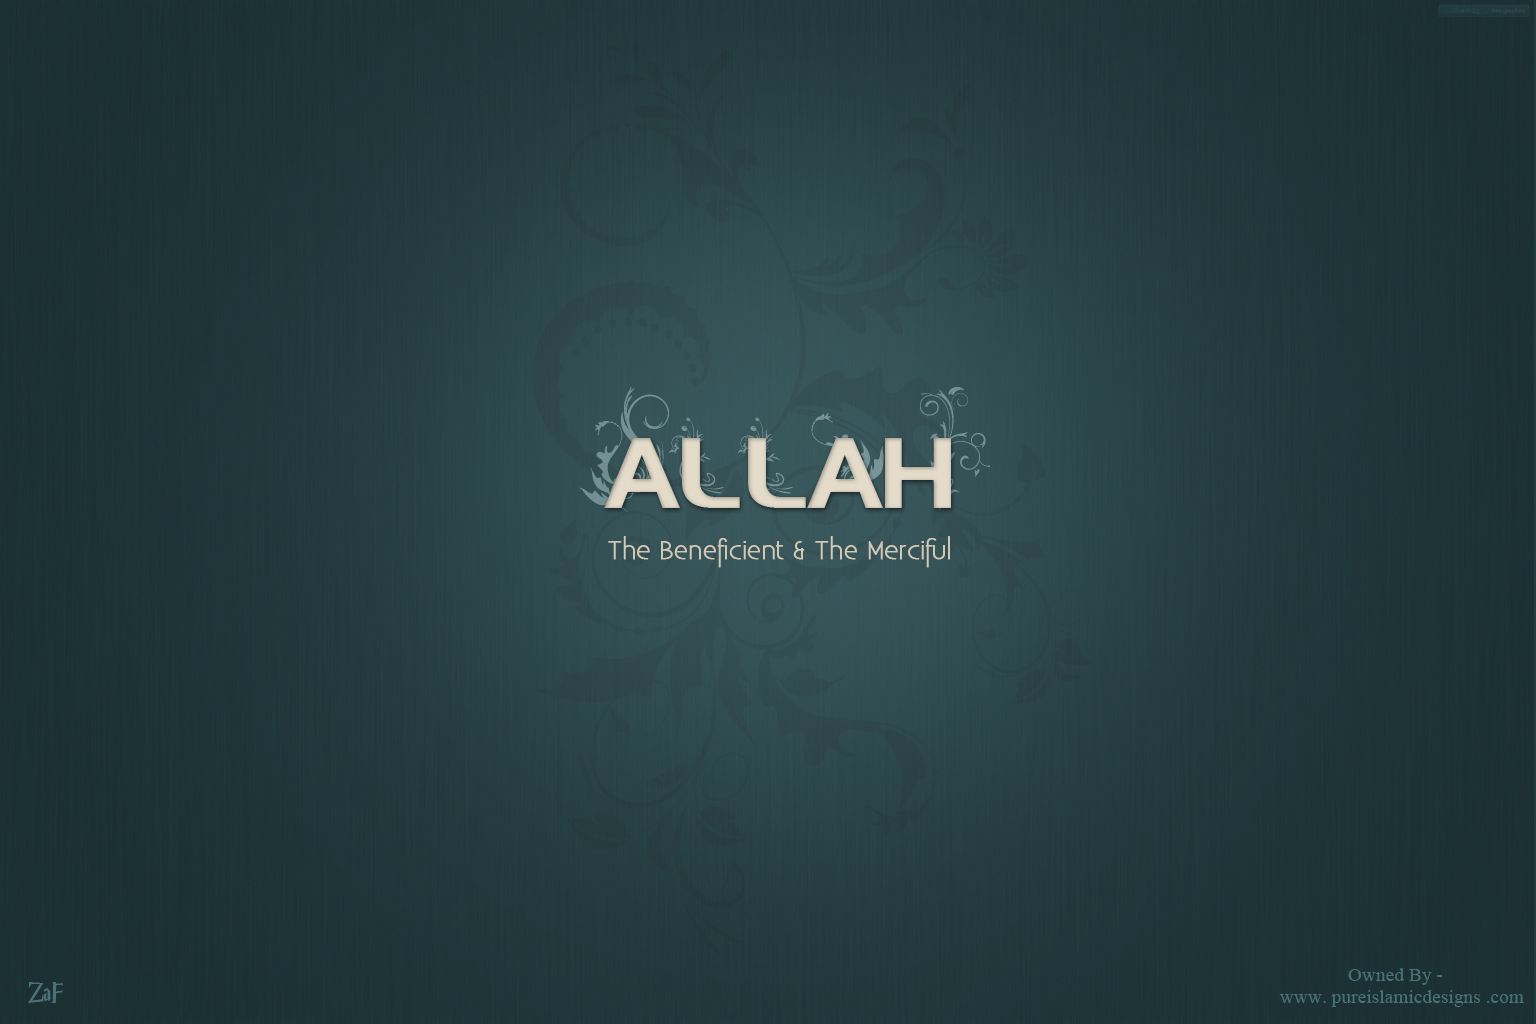 Allah Name Wallpaper HD Pictures One